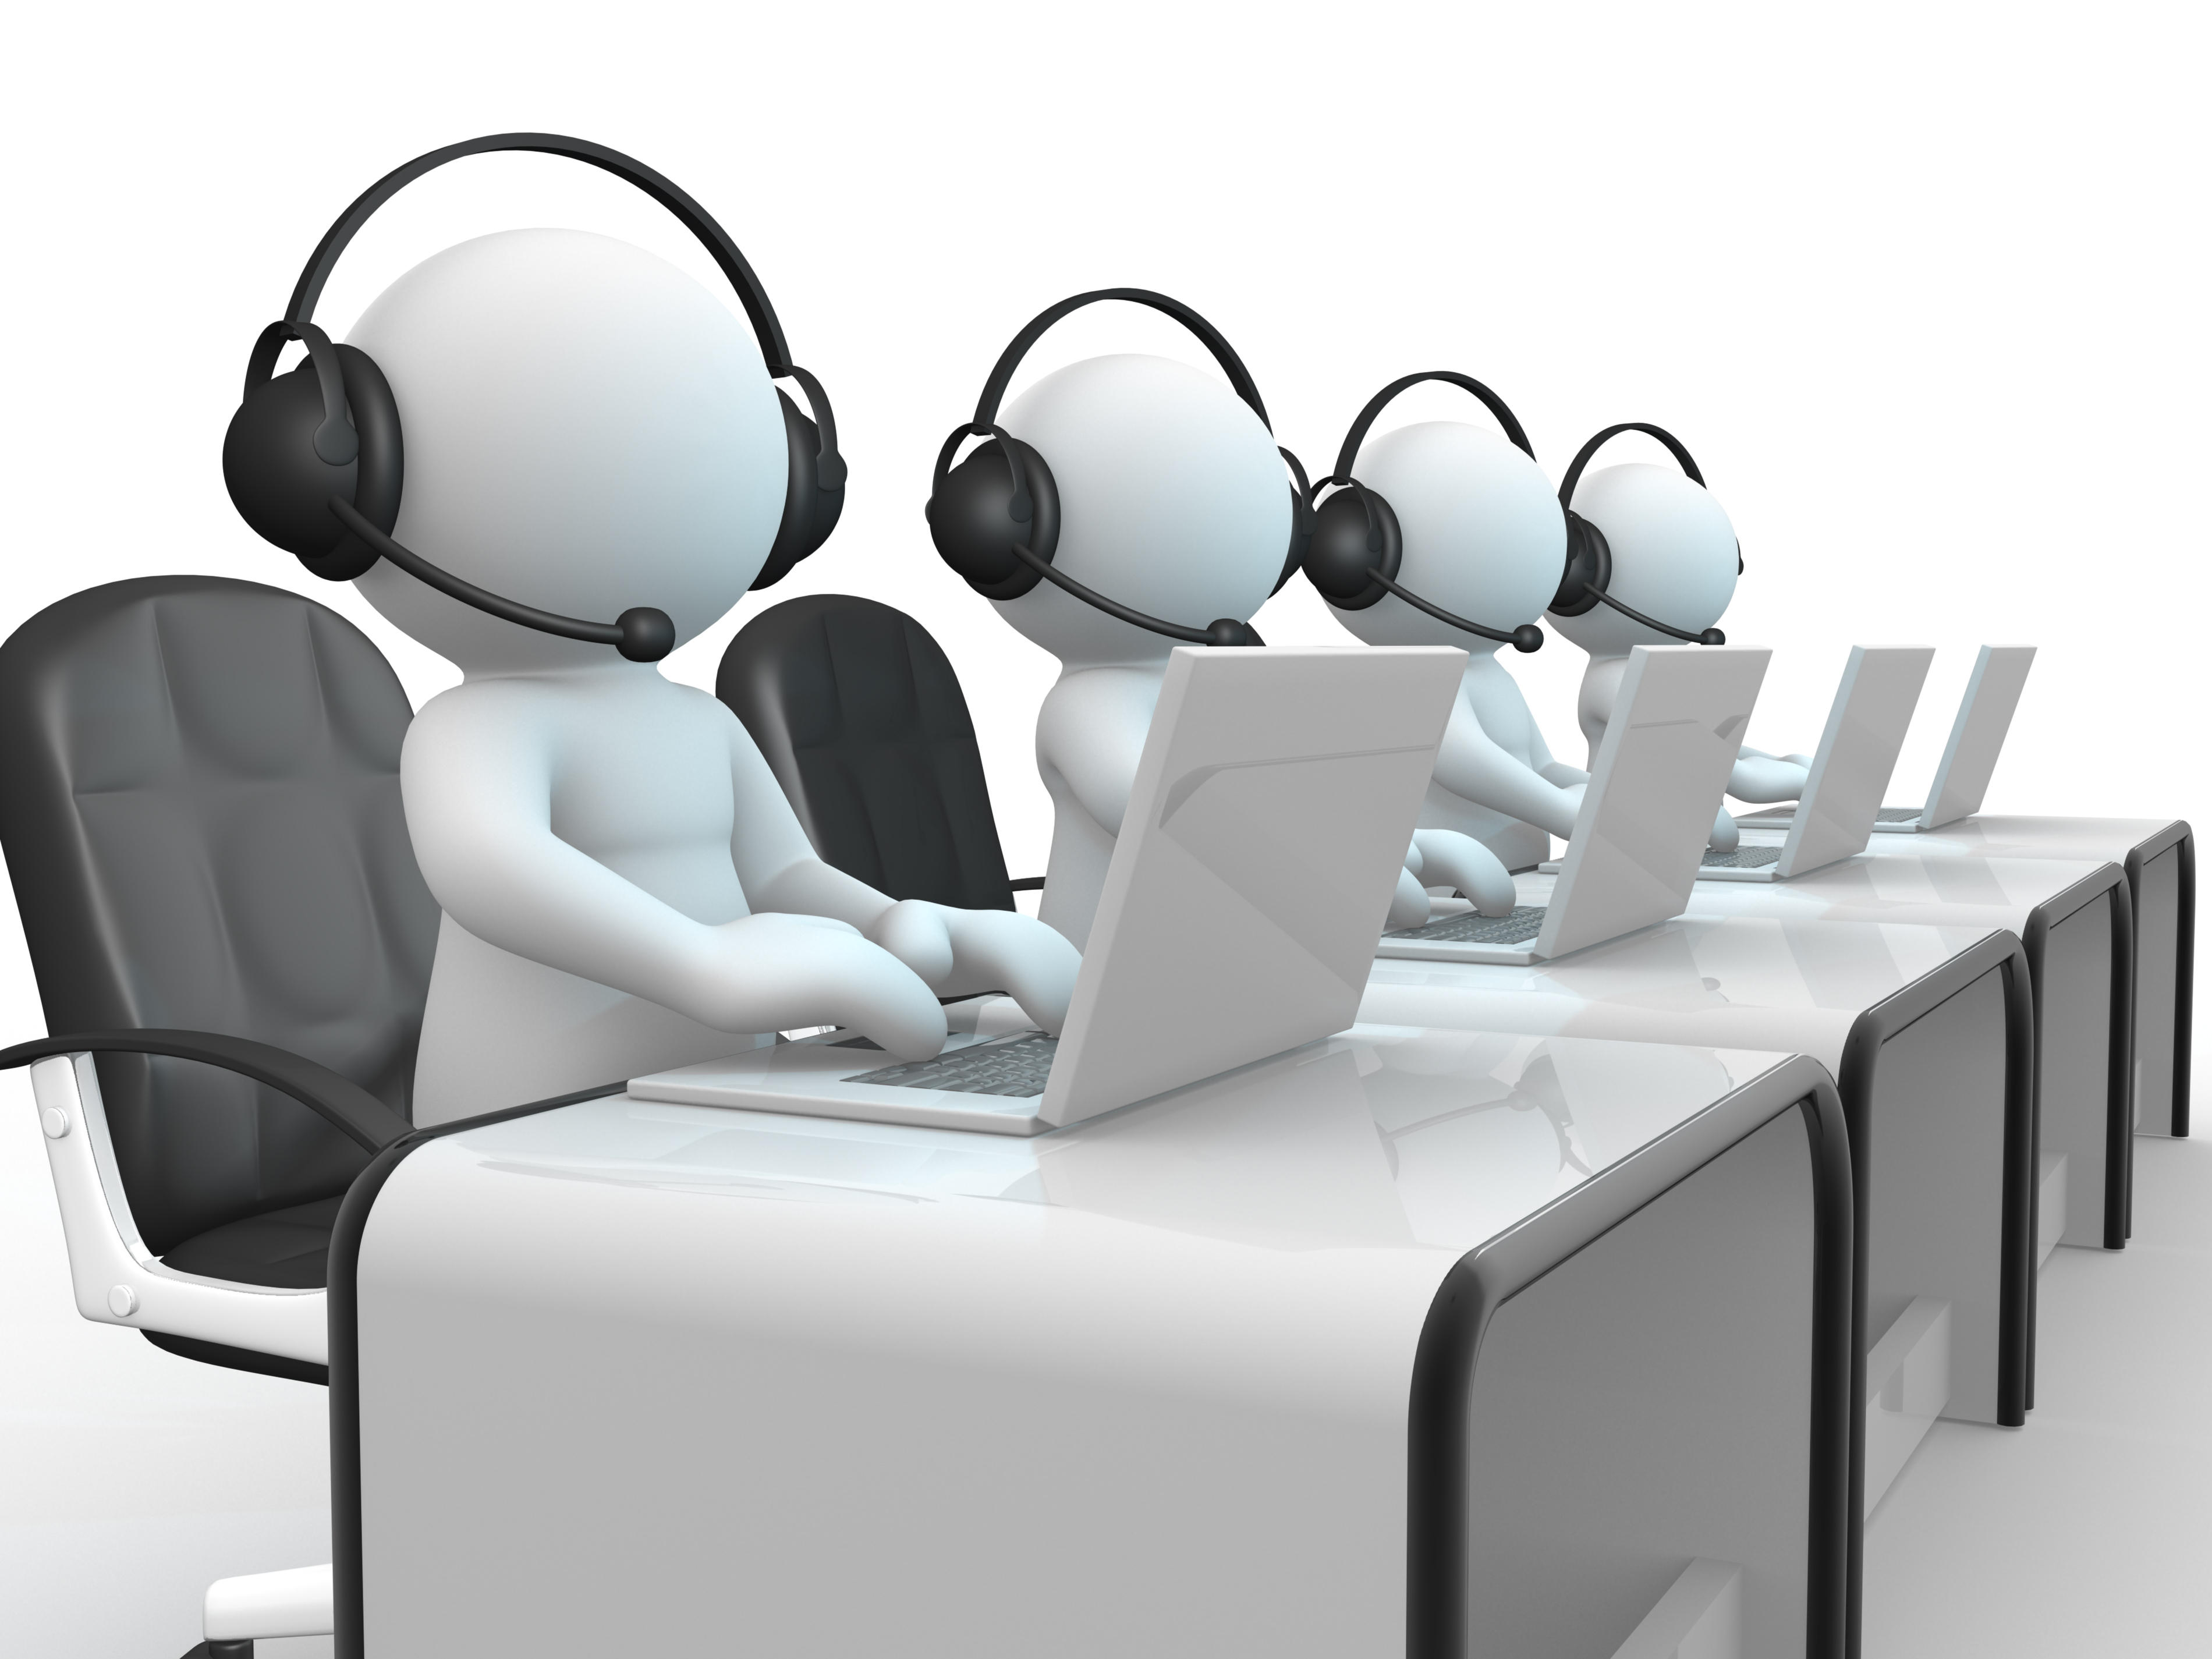 is-seth-godin-s-advice-good-for-call-centers-jz2hdx-clipart